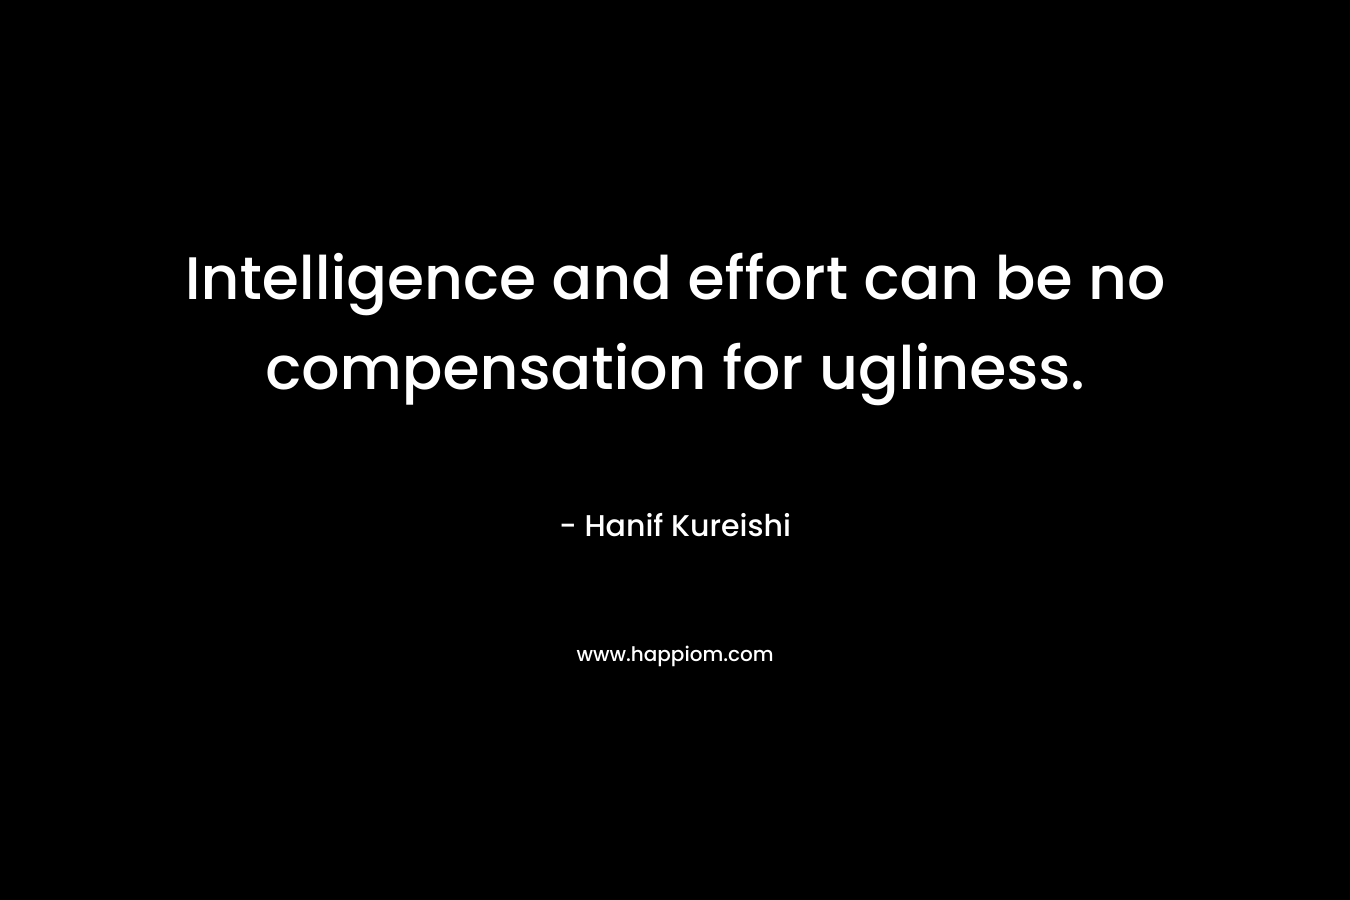 Intelligence and effort can be no compensation for ugliness. – Hanif Kureishi